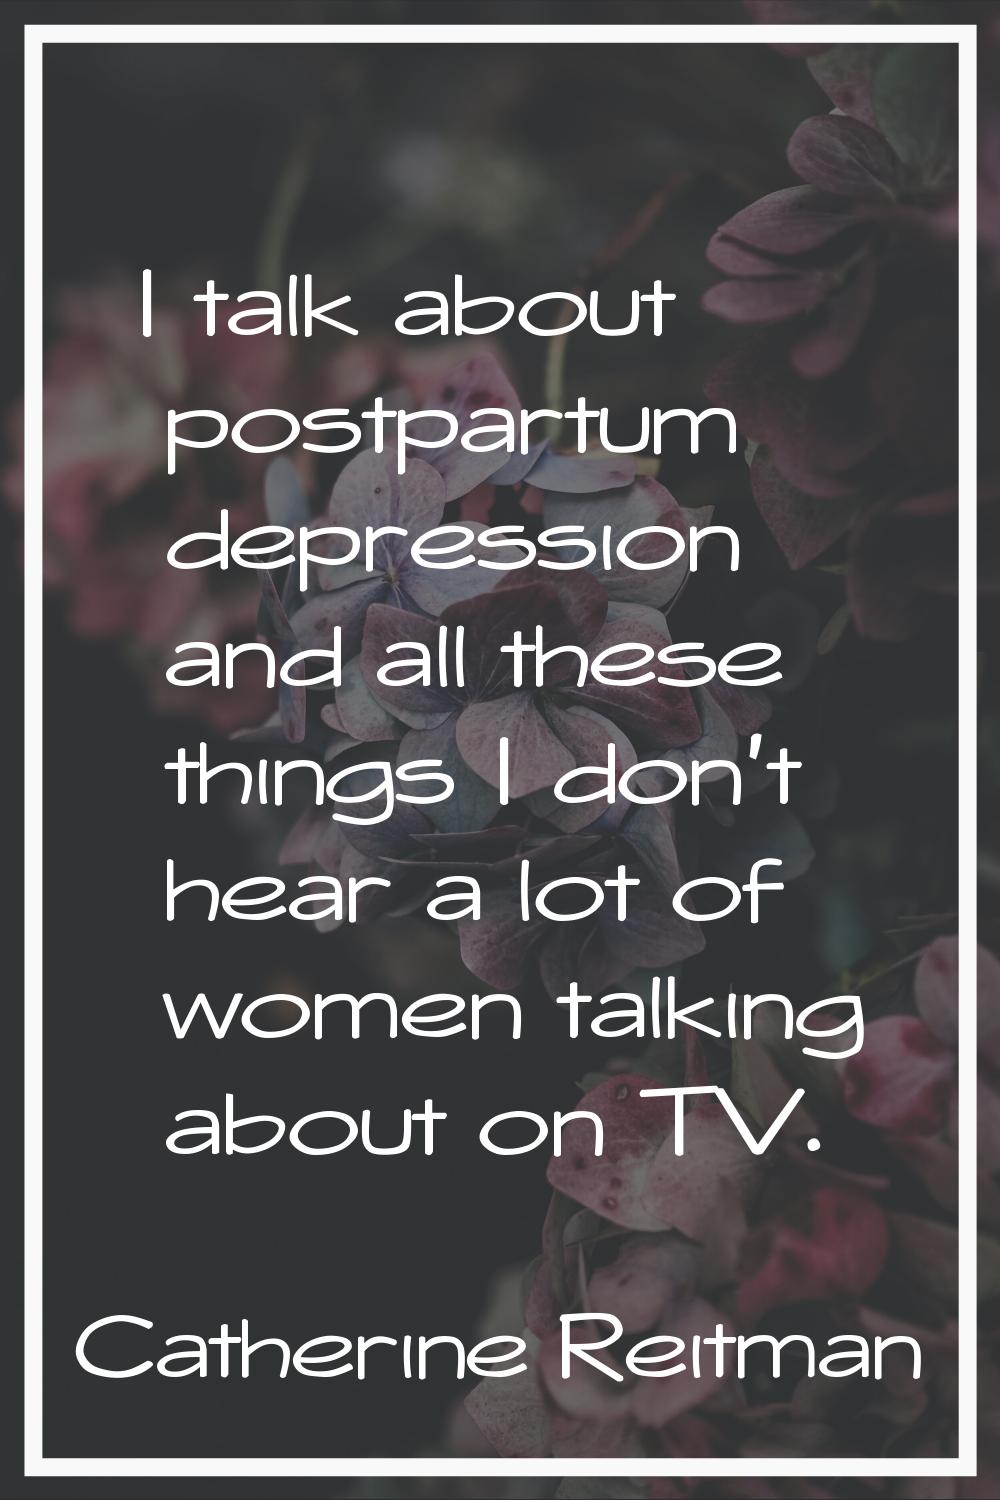 I talk about postpartum depression and all these things I don't hear a lot of women talking about o